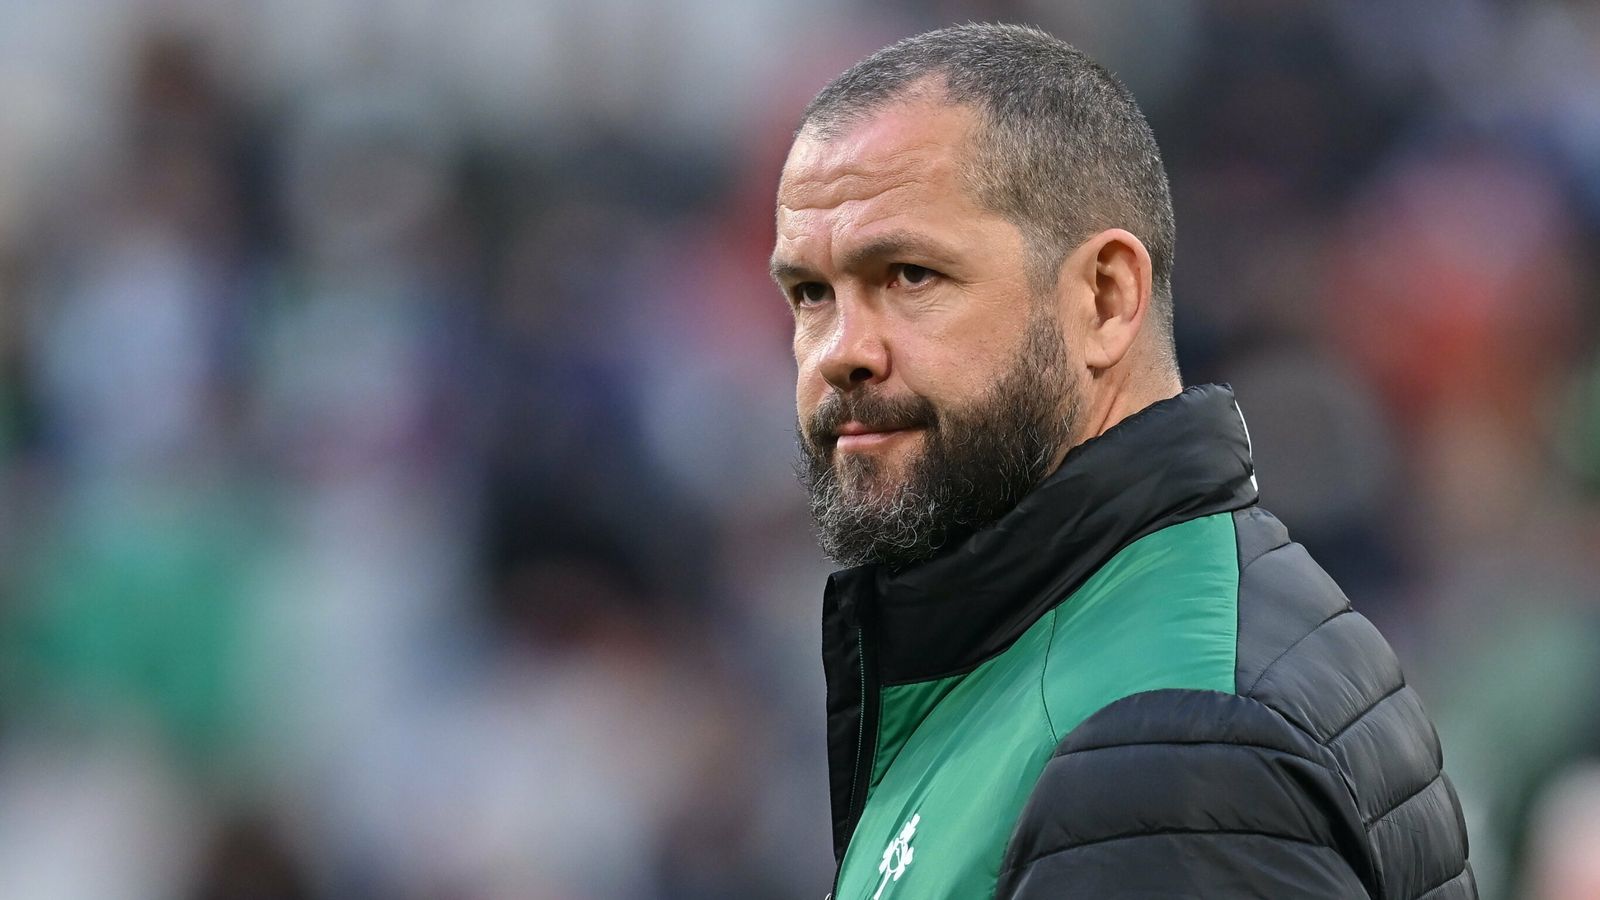 Maori All Blacks vs Ireland on Sky Sports: Andy Farrell says his side face ‘the biggest game of their lives’